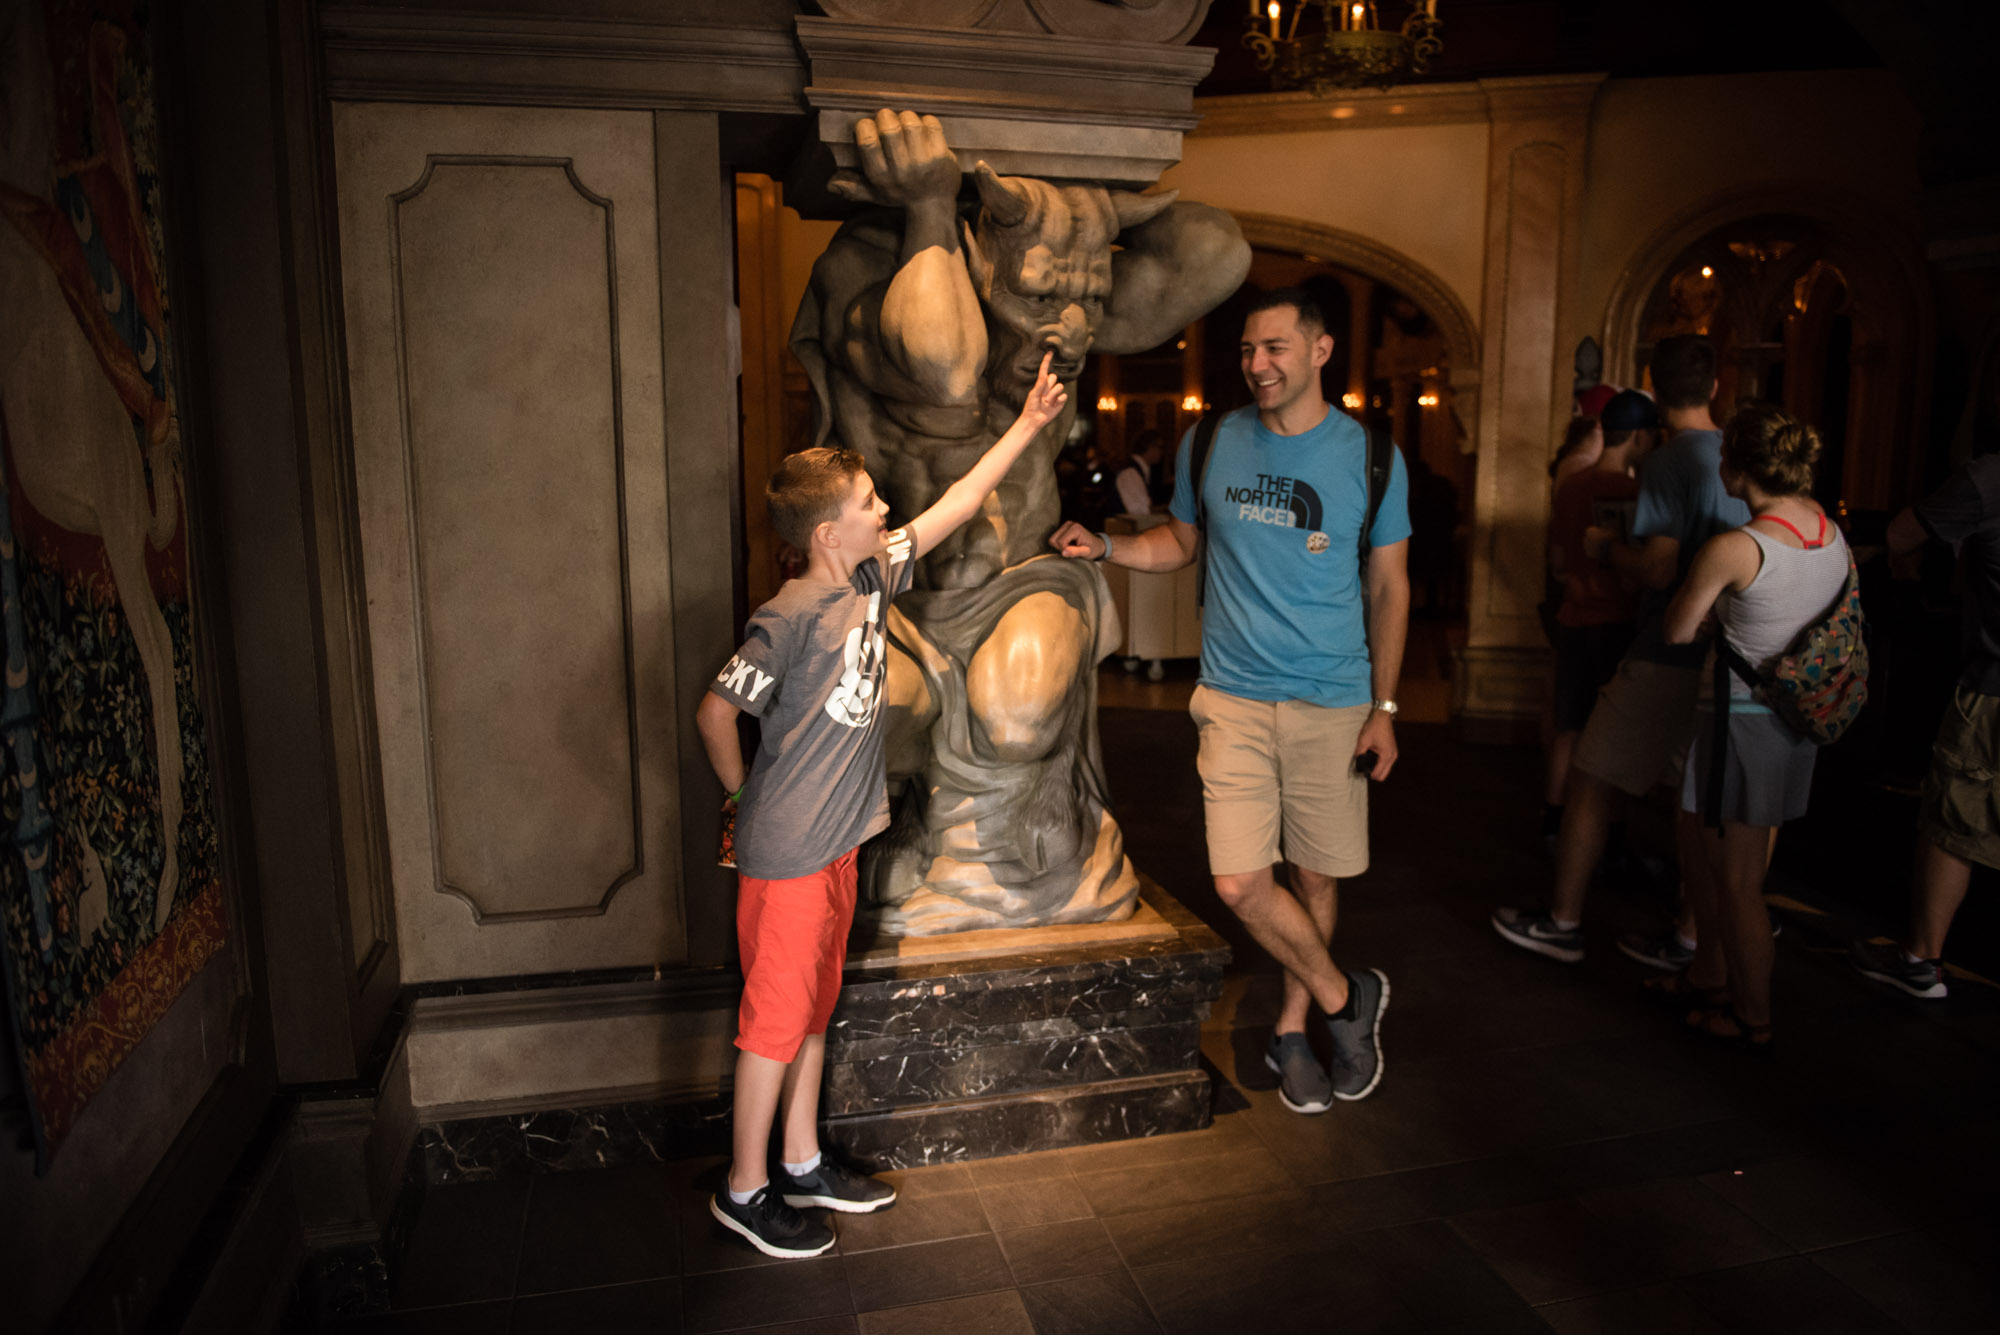 Family-and-kids-at-disney-world-magic-kingdom-Pictures-by-Megan-Cieloha